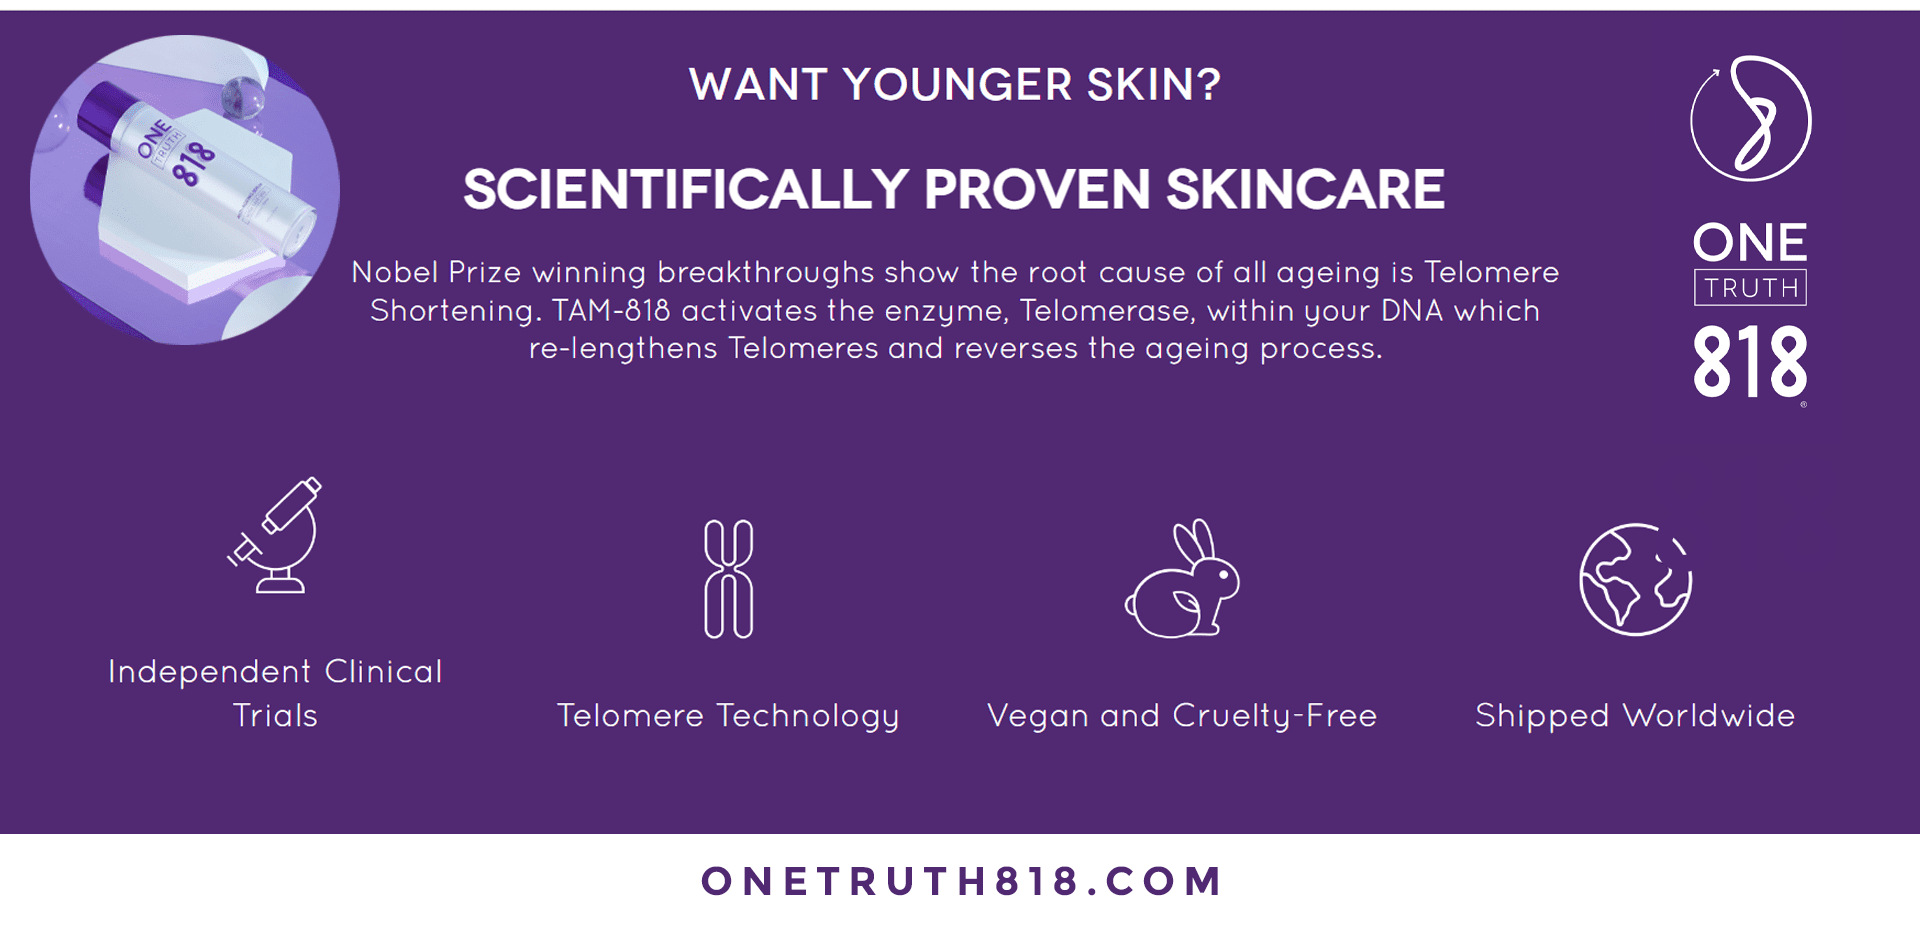 One Truth 818 Anti Ageing Skincare